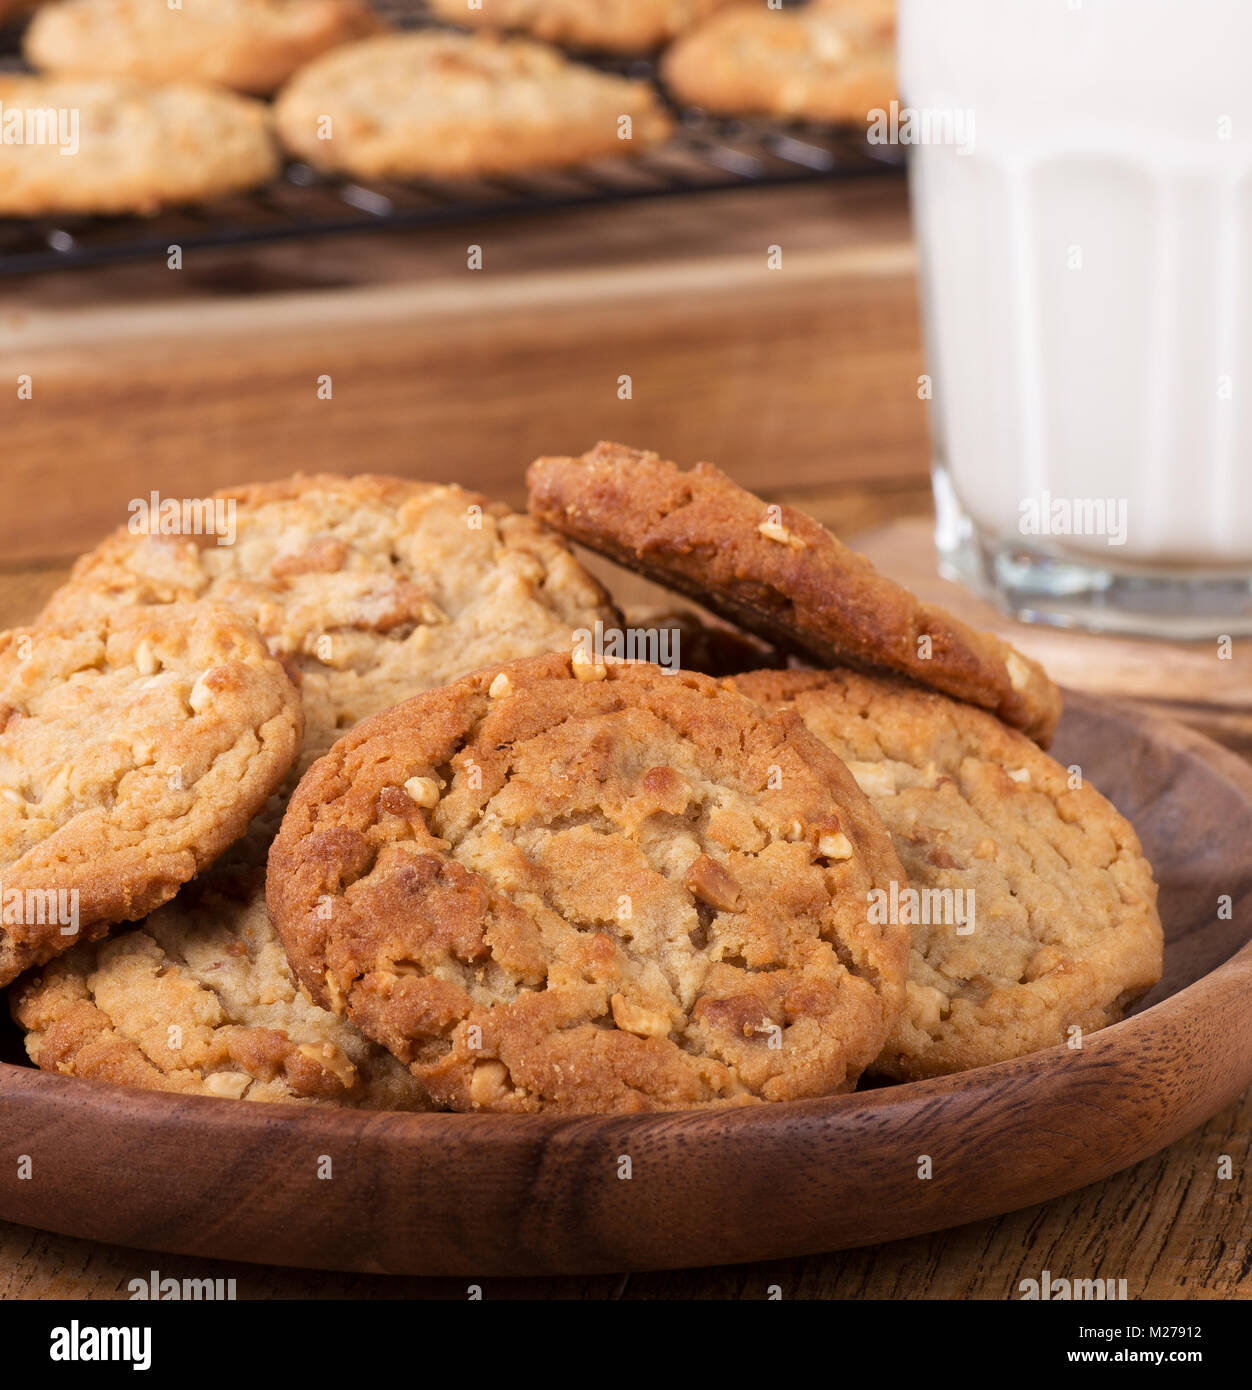 Closeup of peanut butter cookies on a wooden plate with cookies on a cooling rack and glass of milk in background Stock Photo